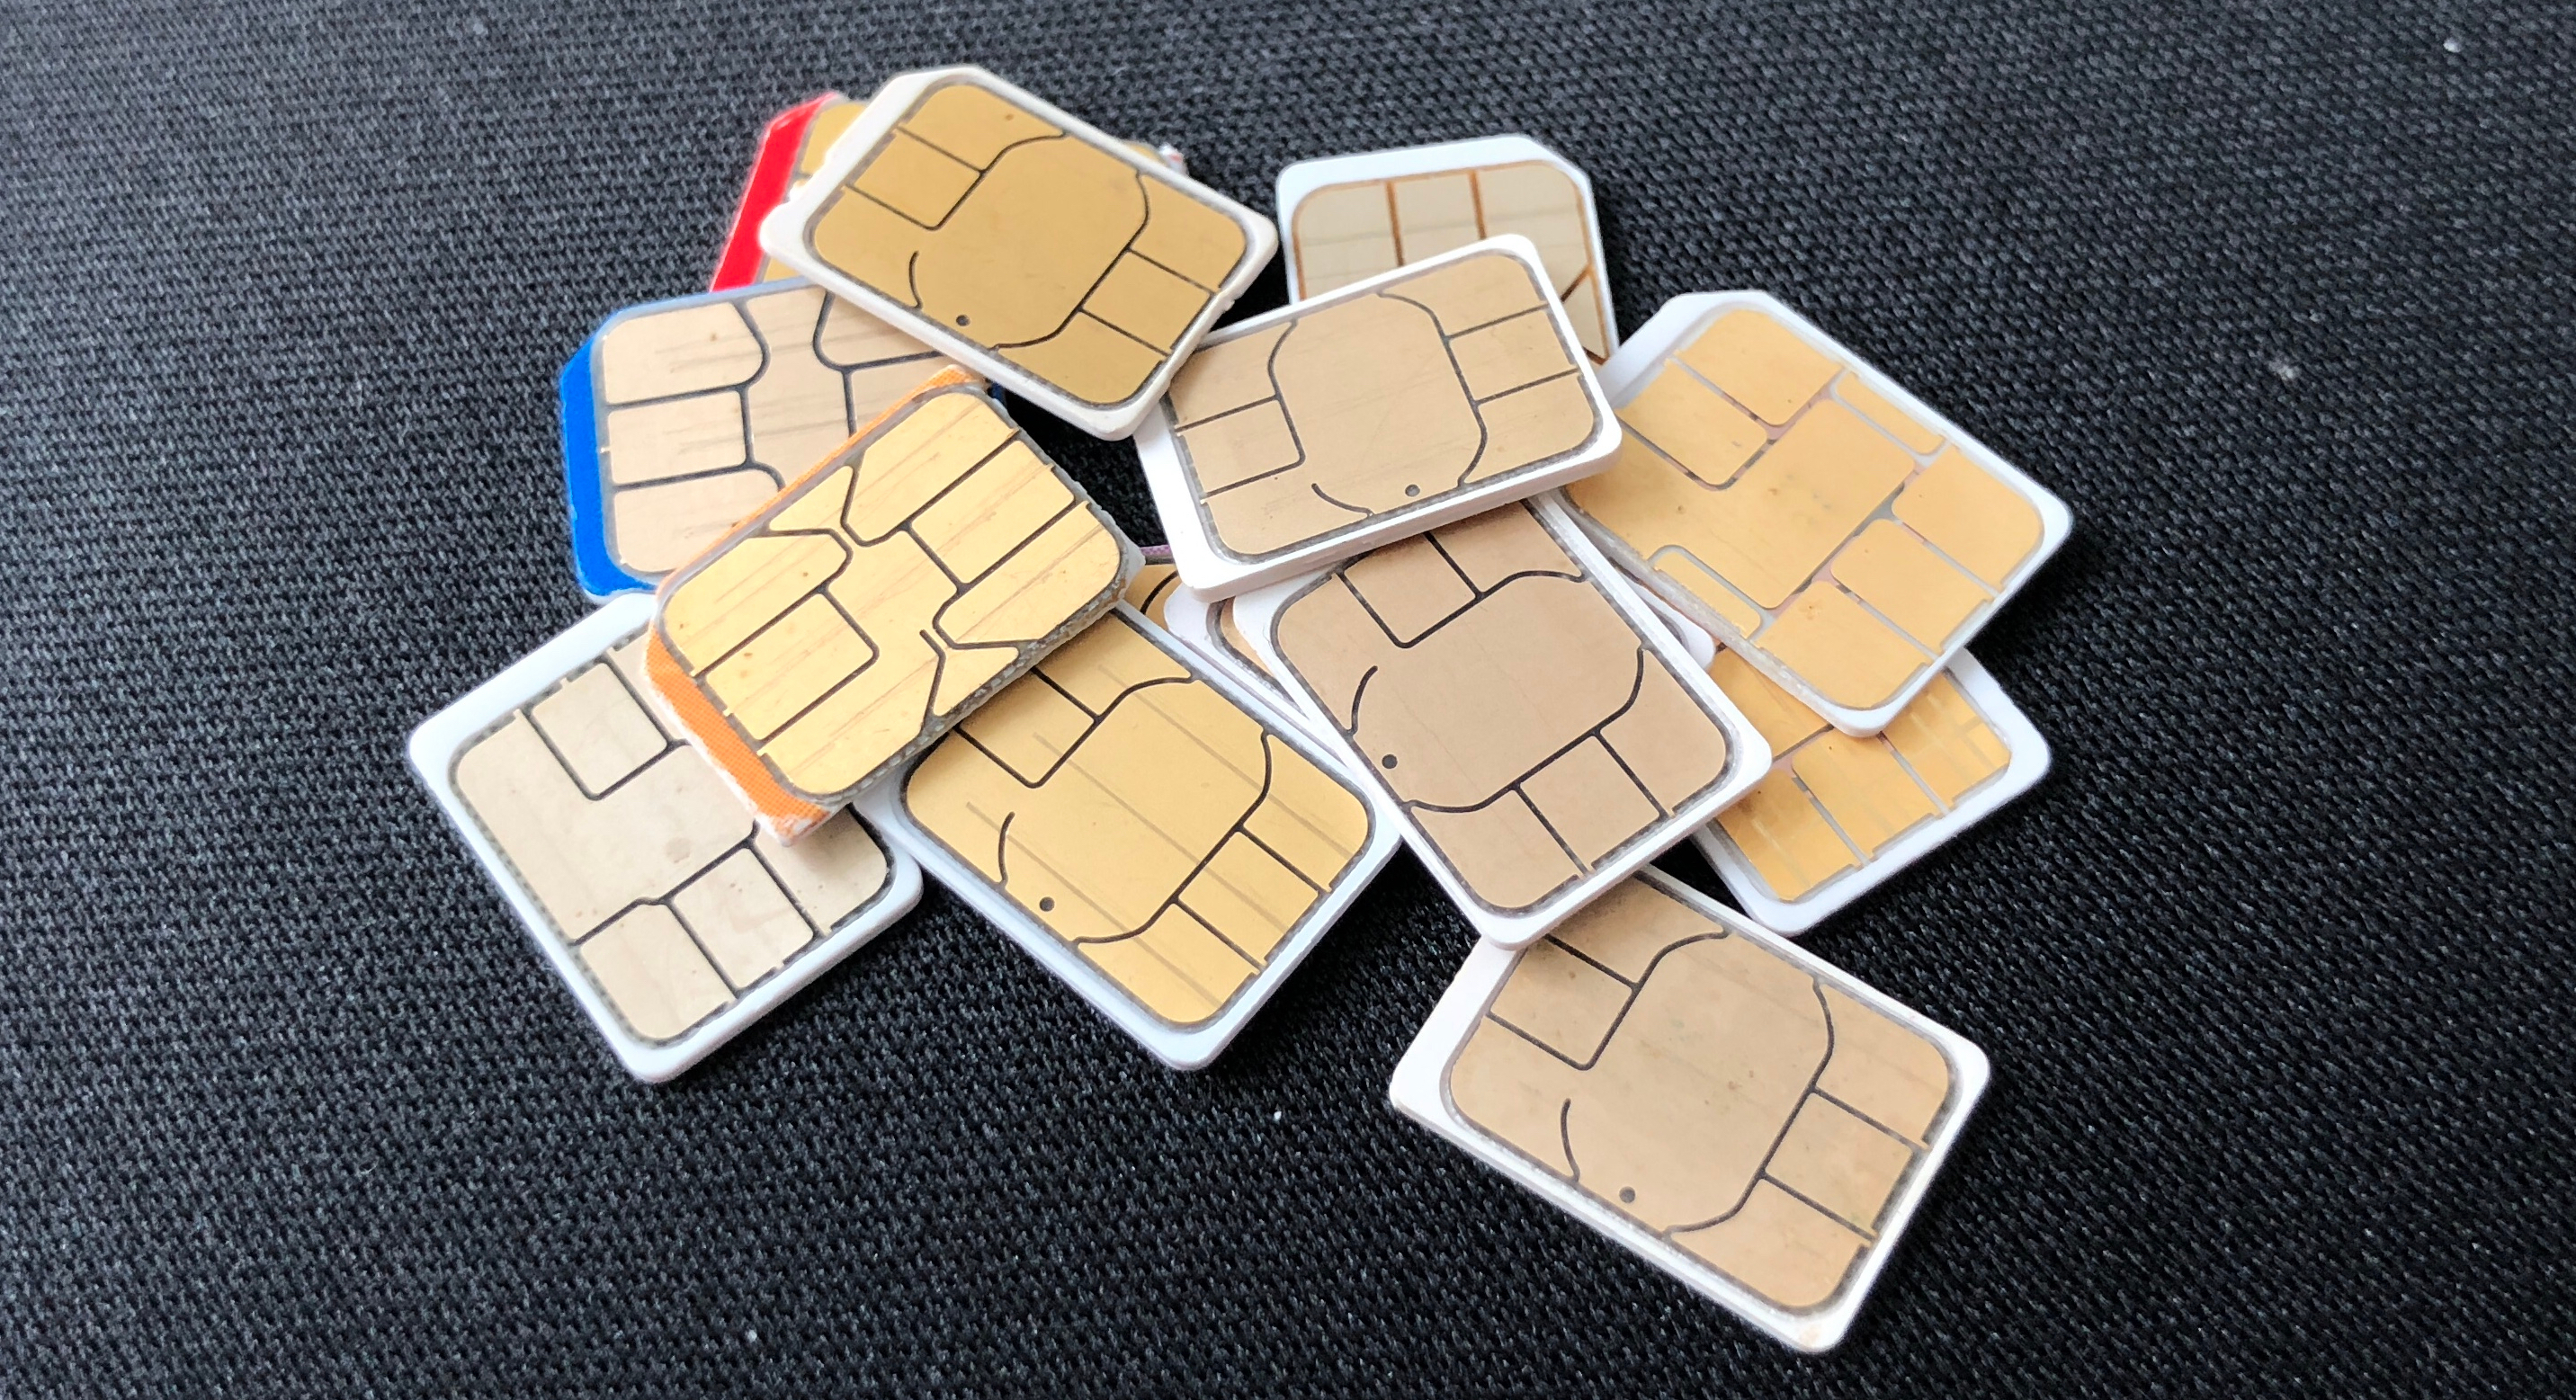 sim card hack for free service